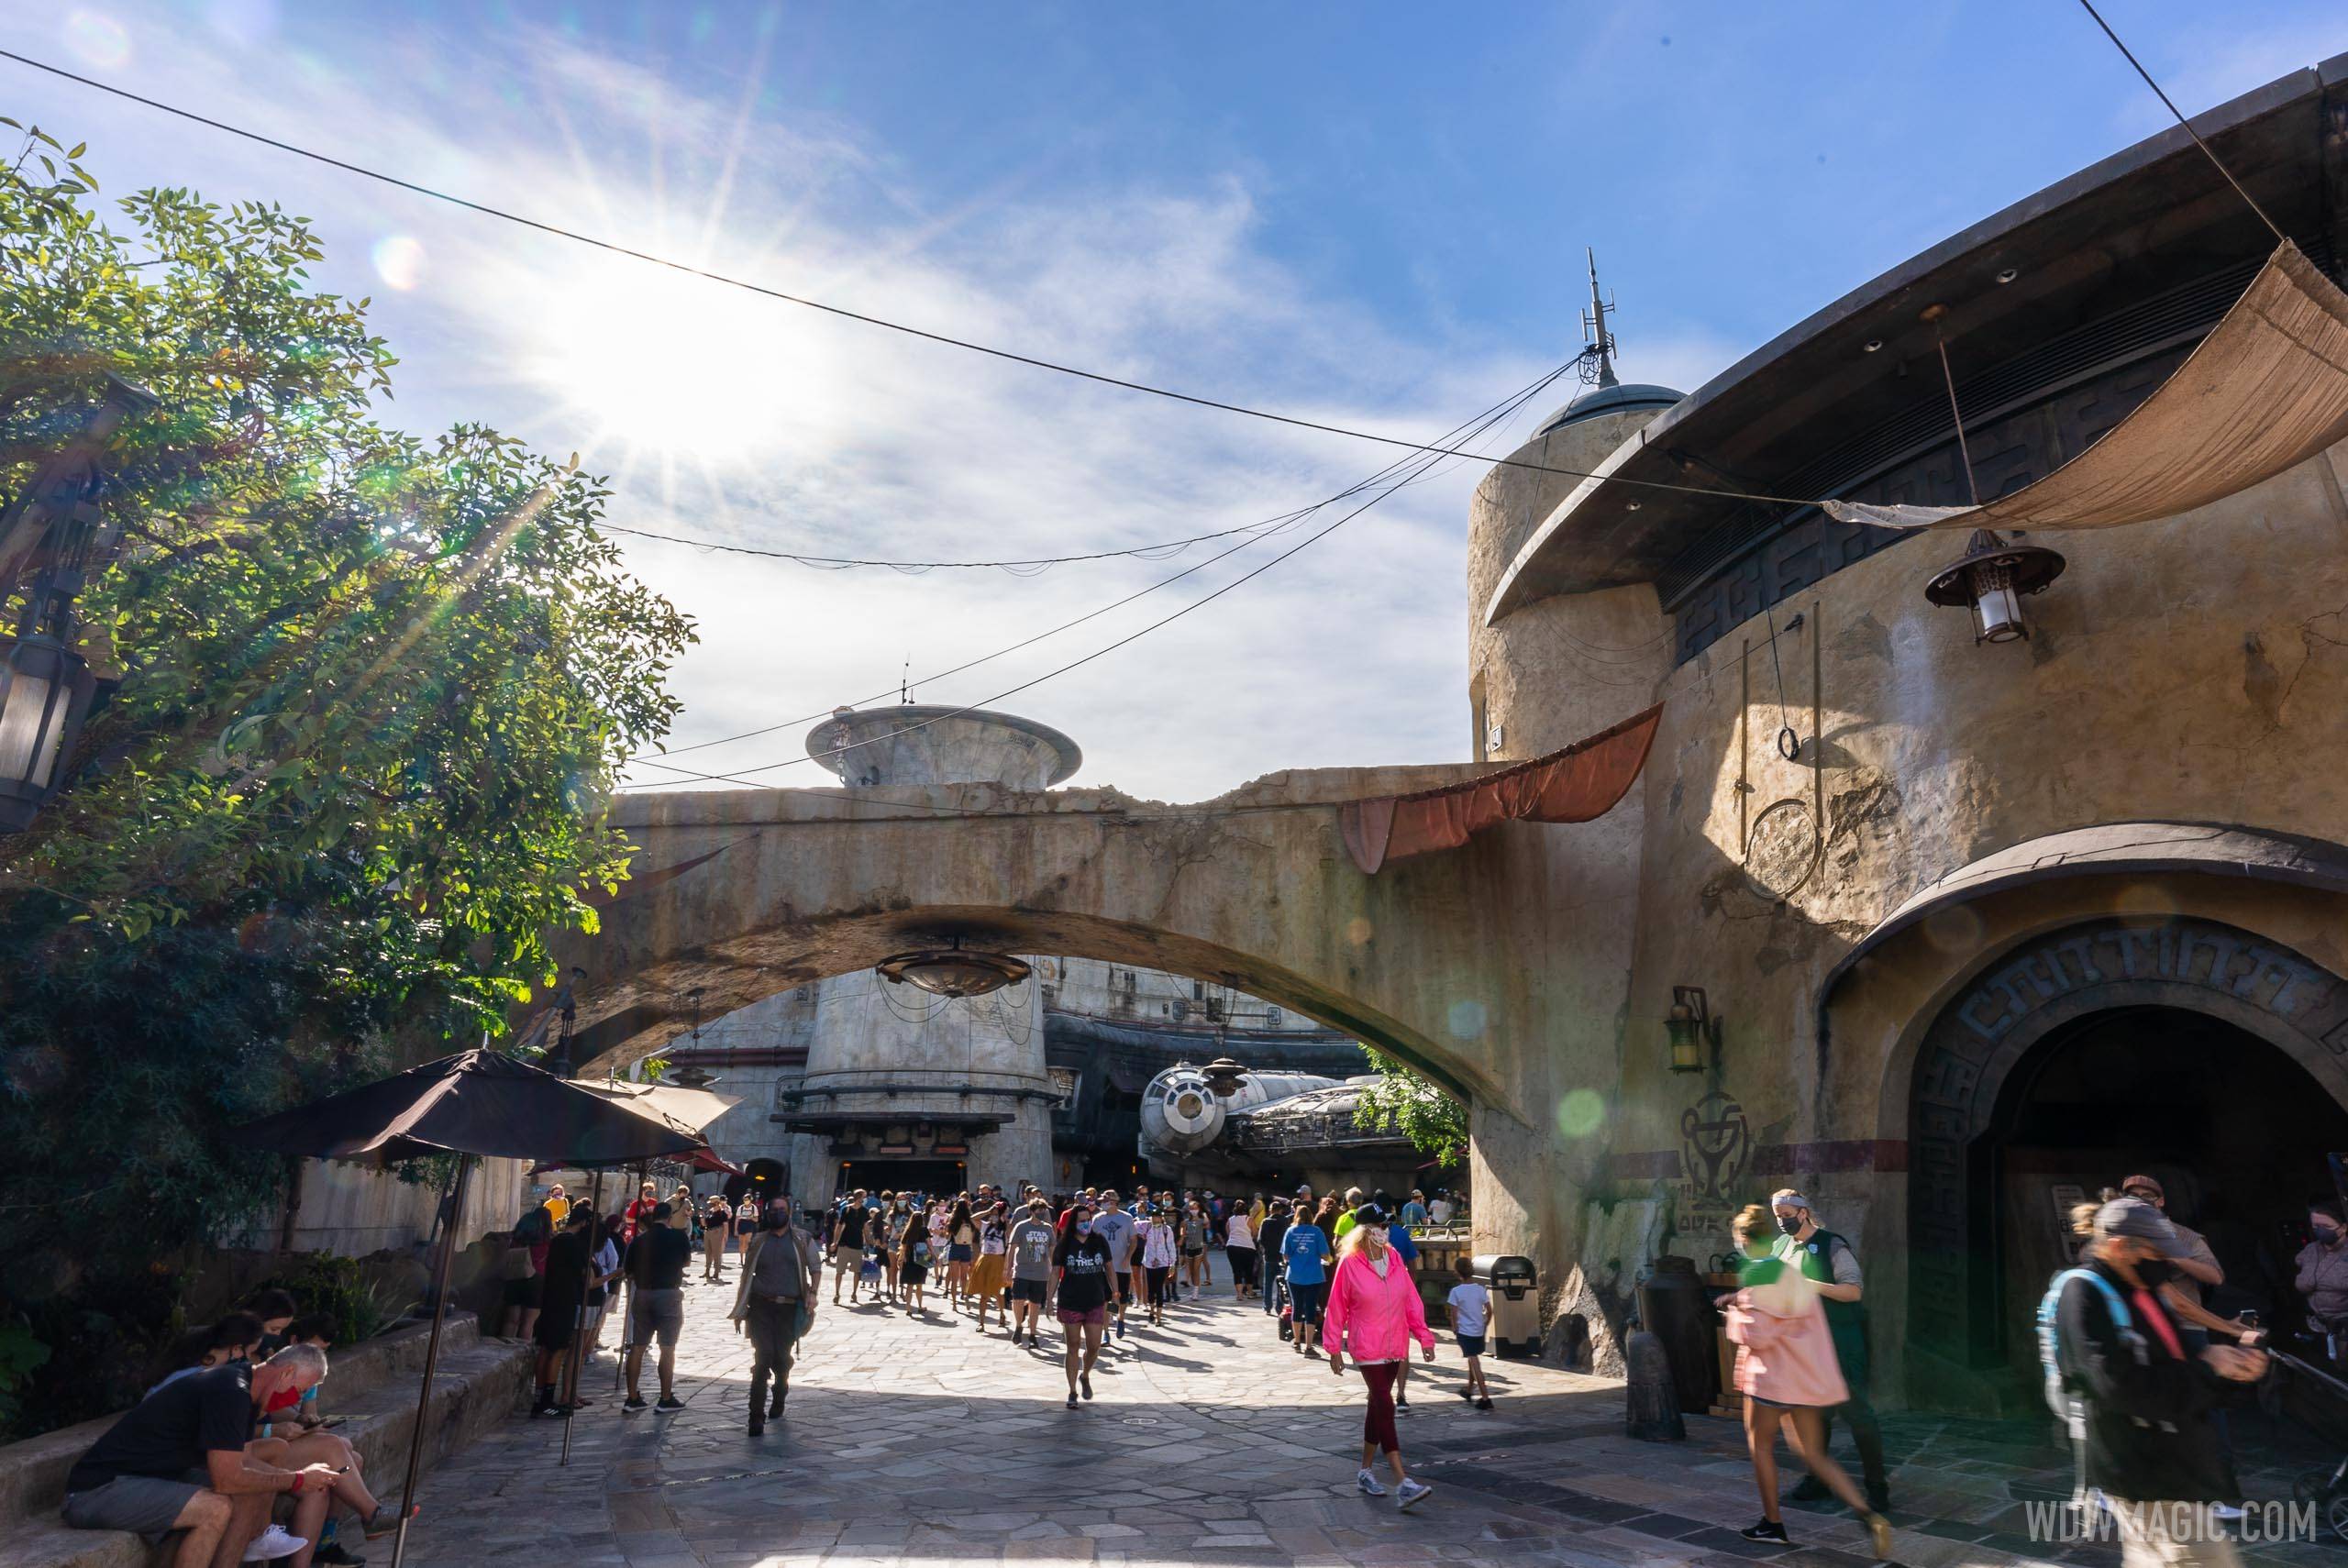 The line for Smugglers Run is filling the walkways of Galaxy's Edge